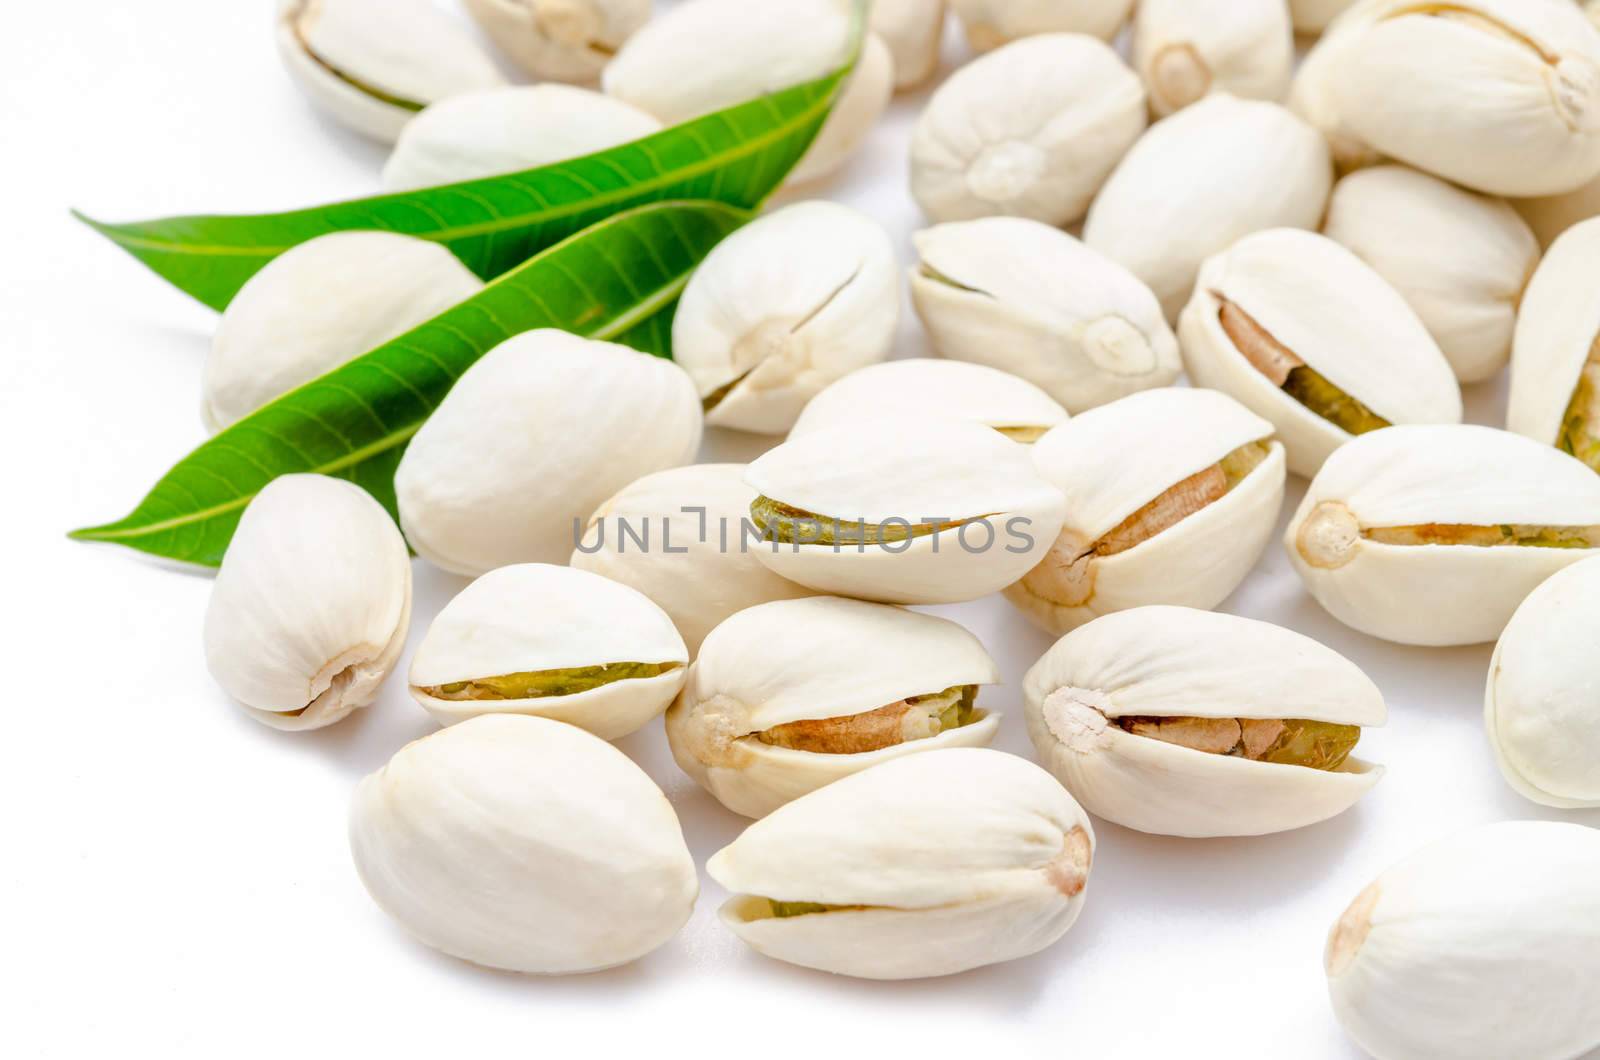 Dried pistachios nuts and green leaf on a white background